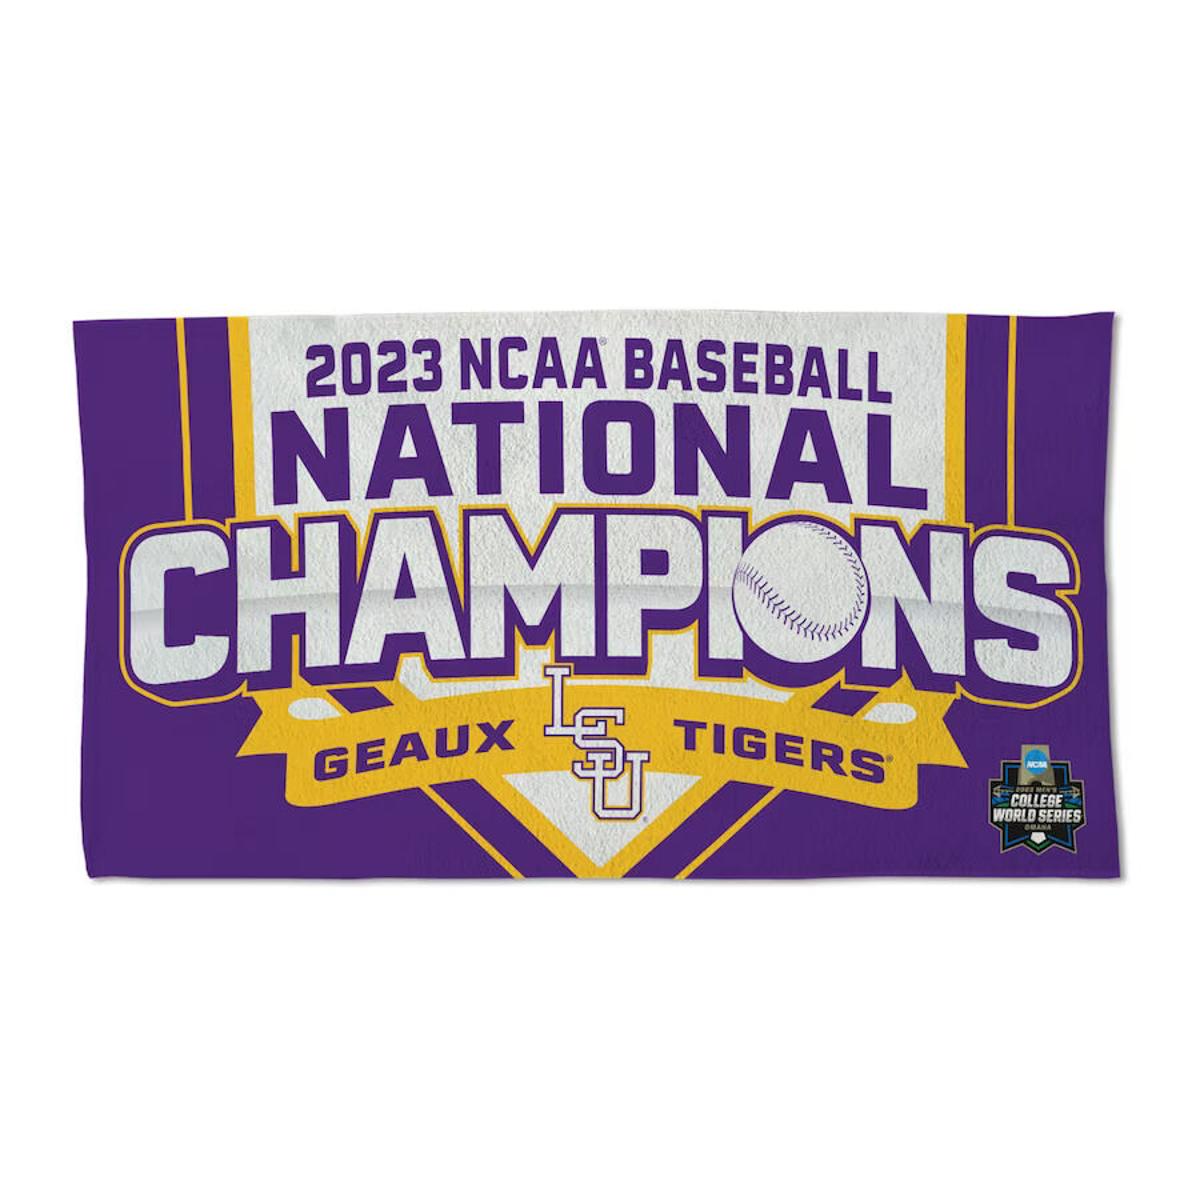 Youth ProSphere #23 Gold LSU Tigers 2023 NCAA Men's Baseball